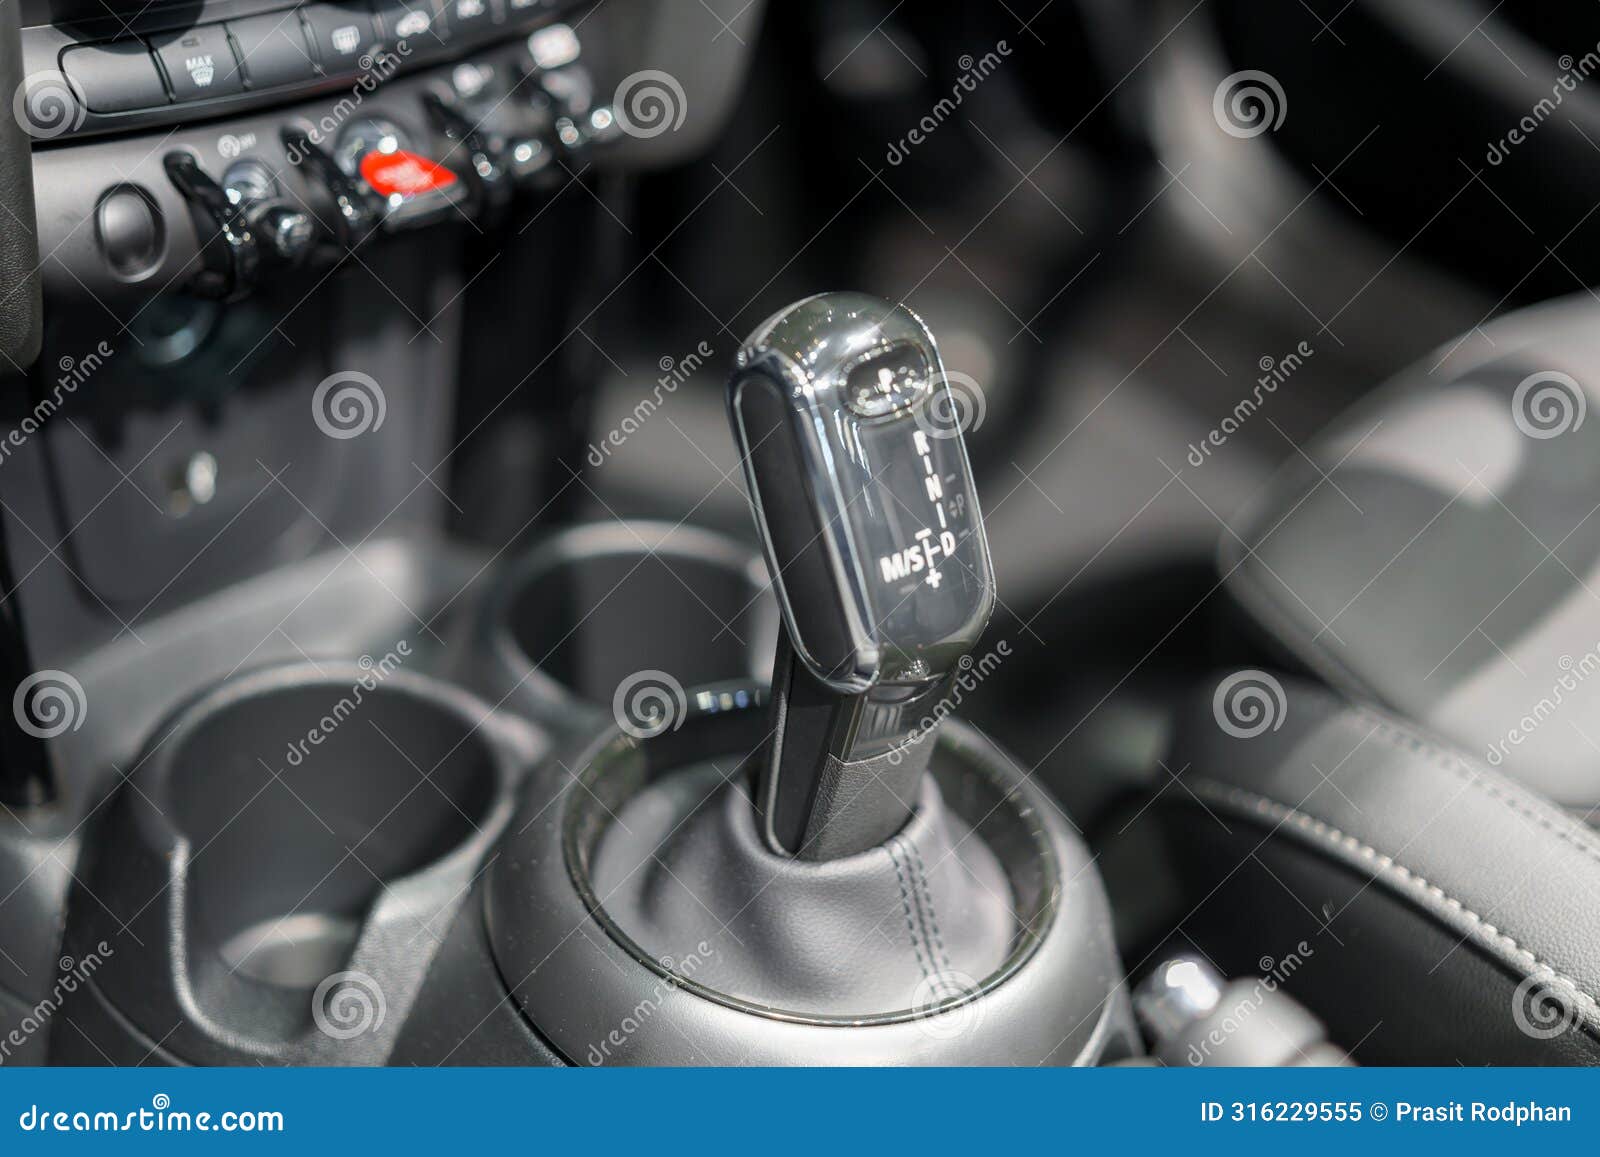 close up of modern car automatic gearbox and control buttons